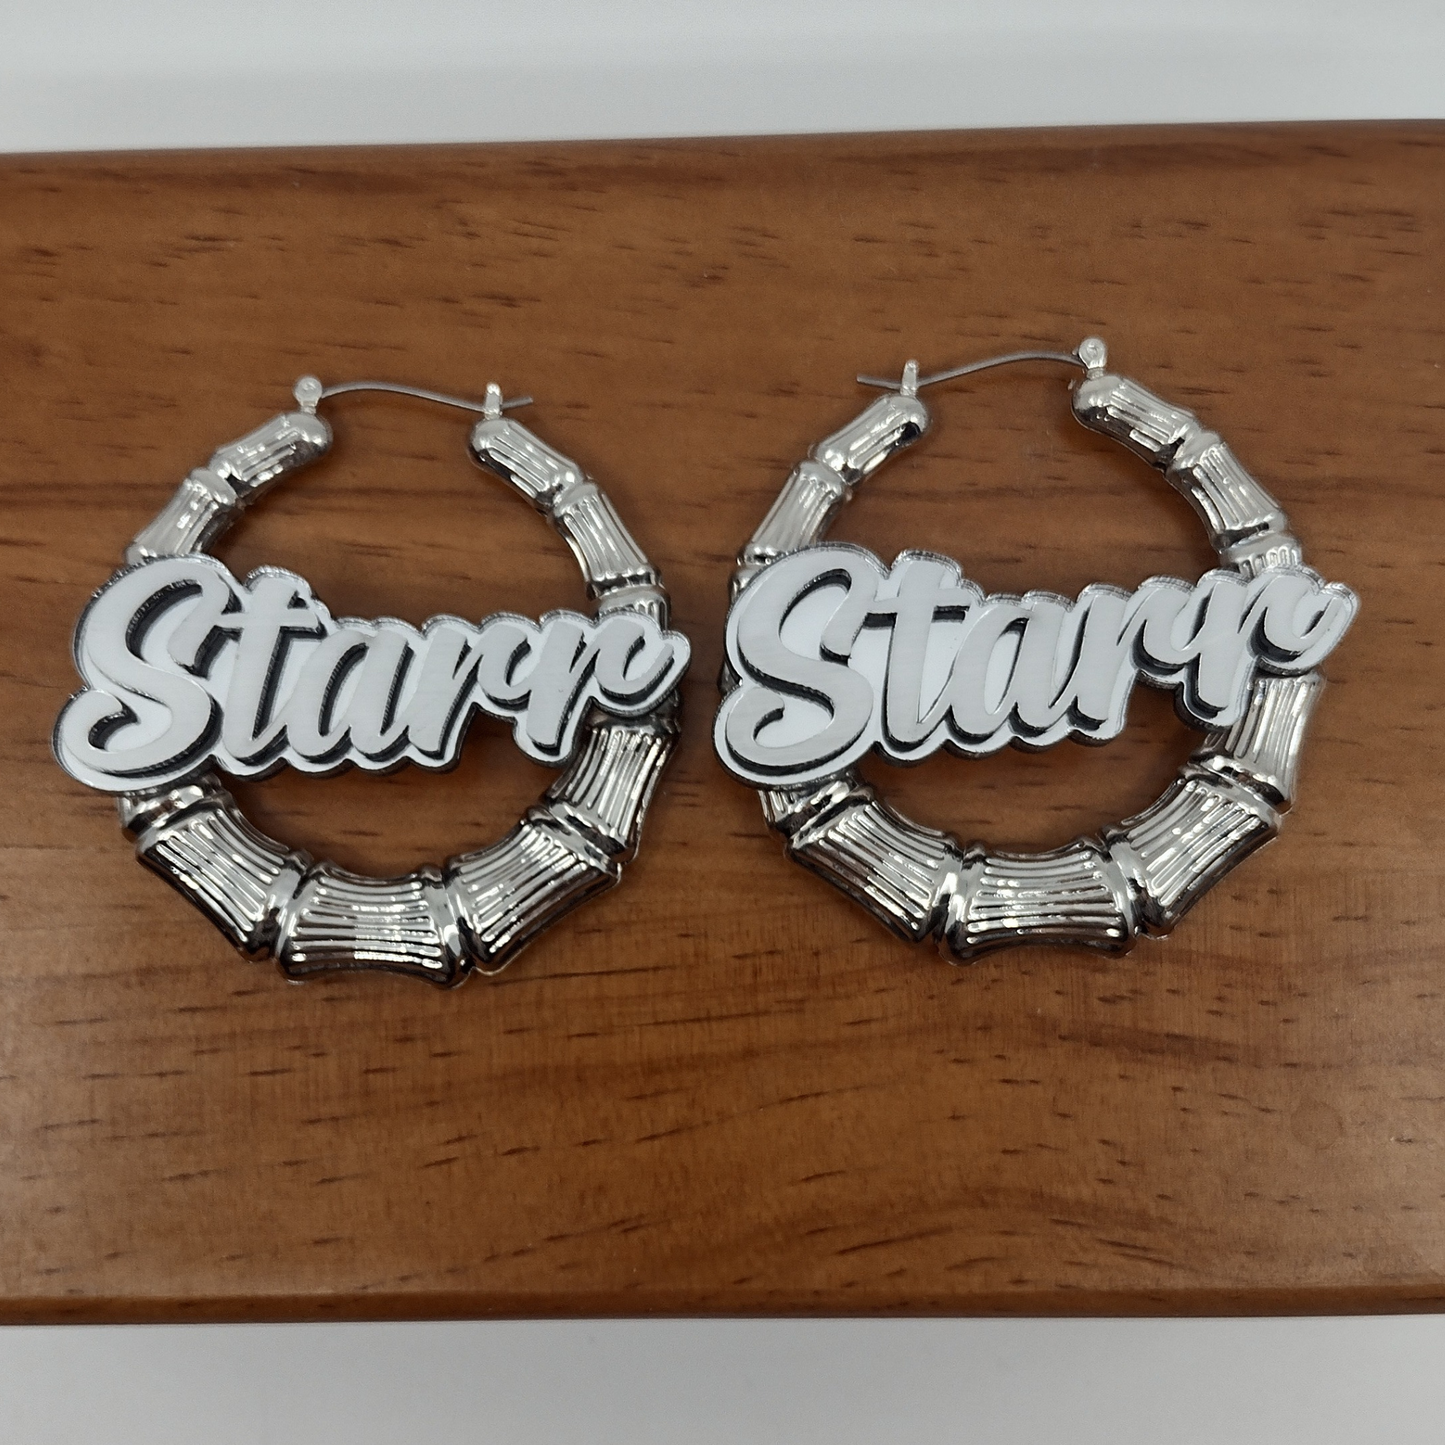 Custom Silver Hoop Earrings and a Name Necklace, Personalized Name and Background Color, Hand-made Jewelry Set